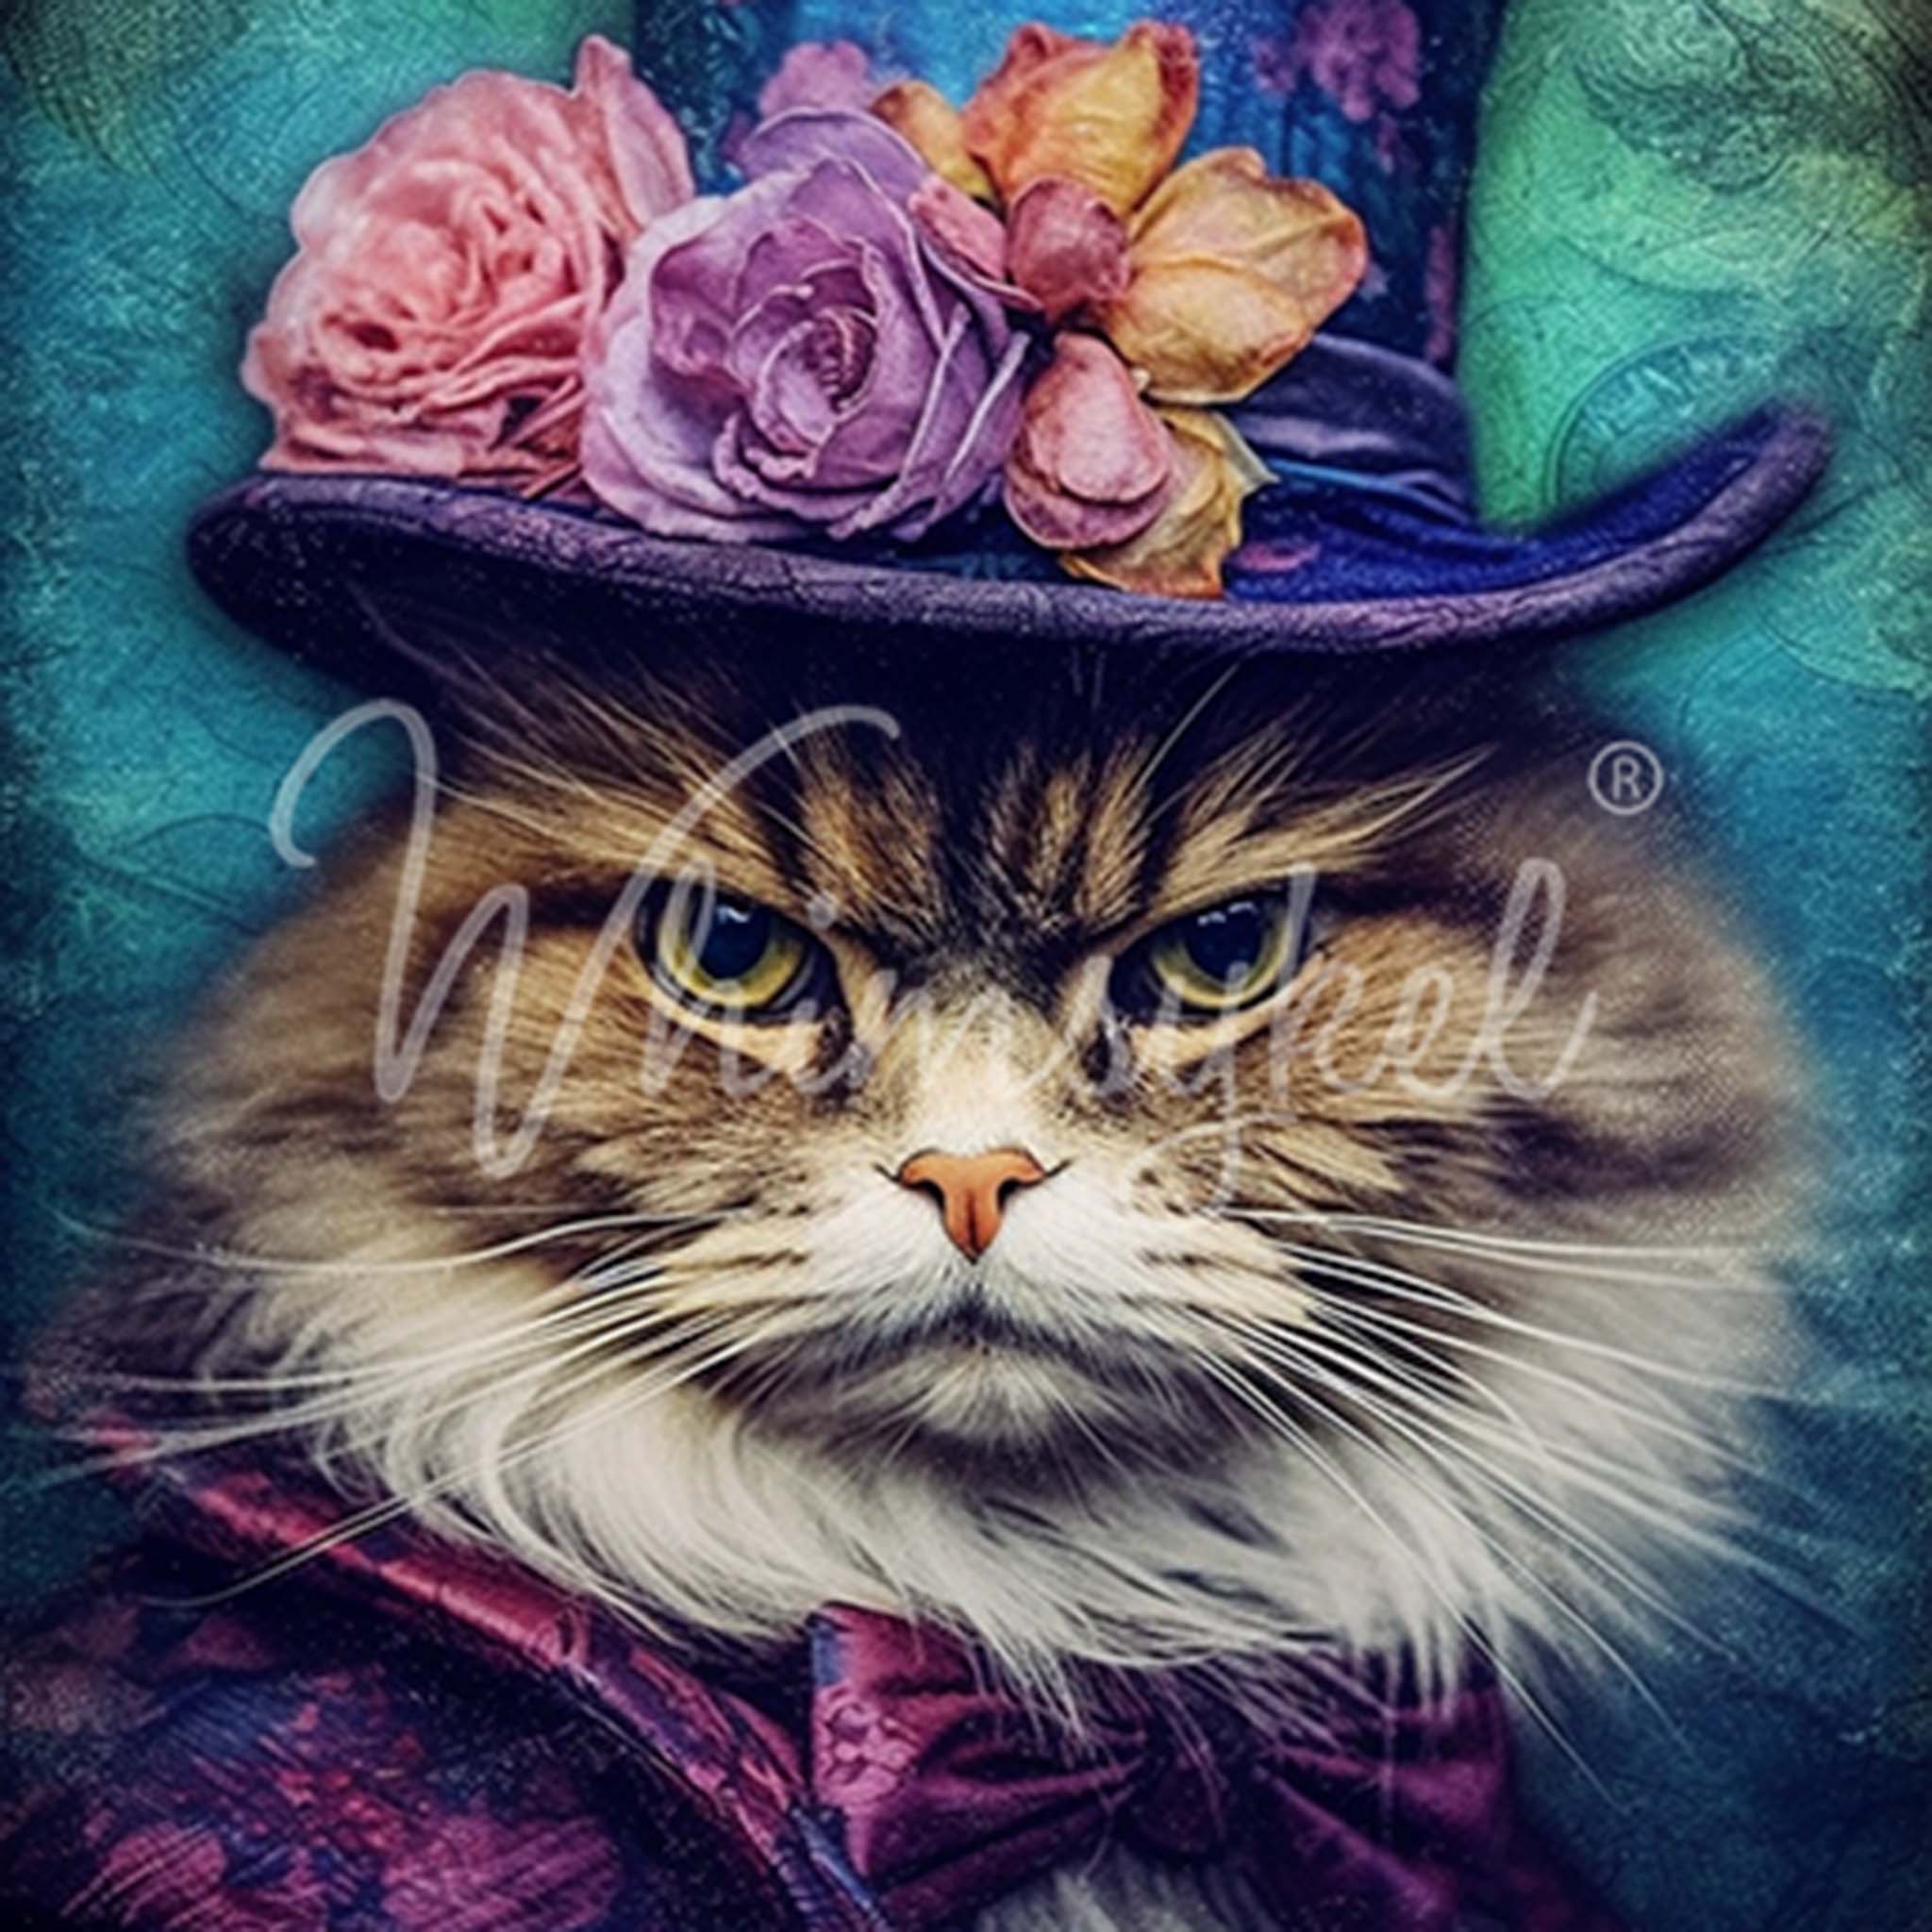 Close-up of a tissue paper design that features enchanting artwork that perfectly captures the essence of a grumpy yet dapper cat in a jacket with a bowtie and is wearing a top hat with purple and pink roses.